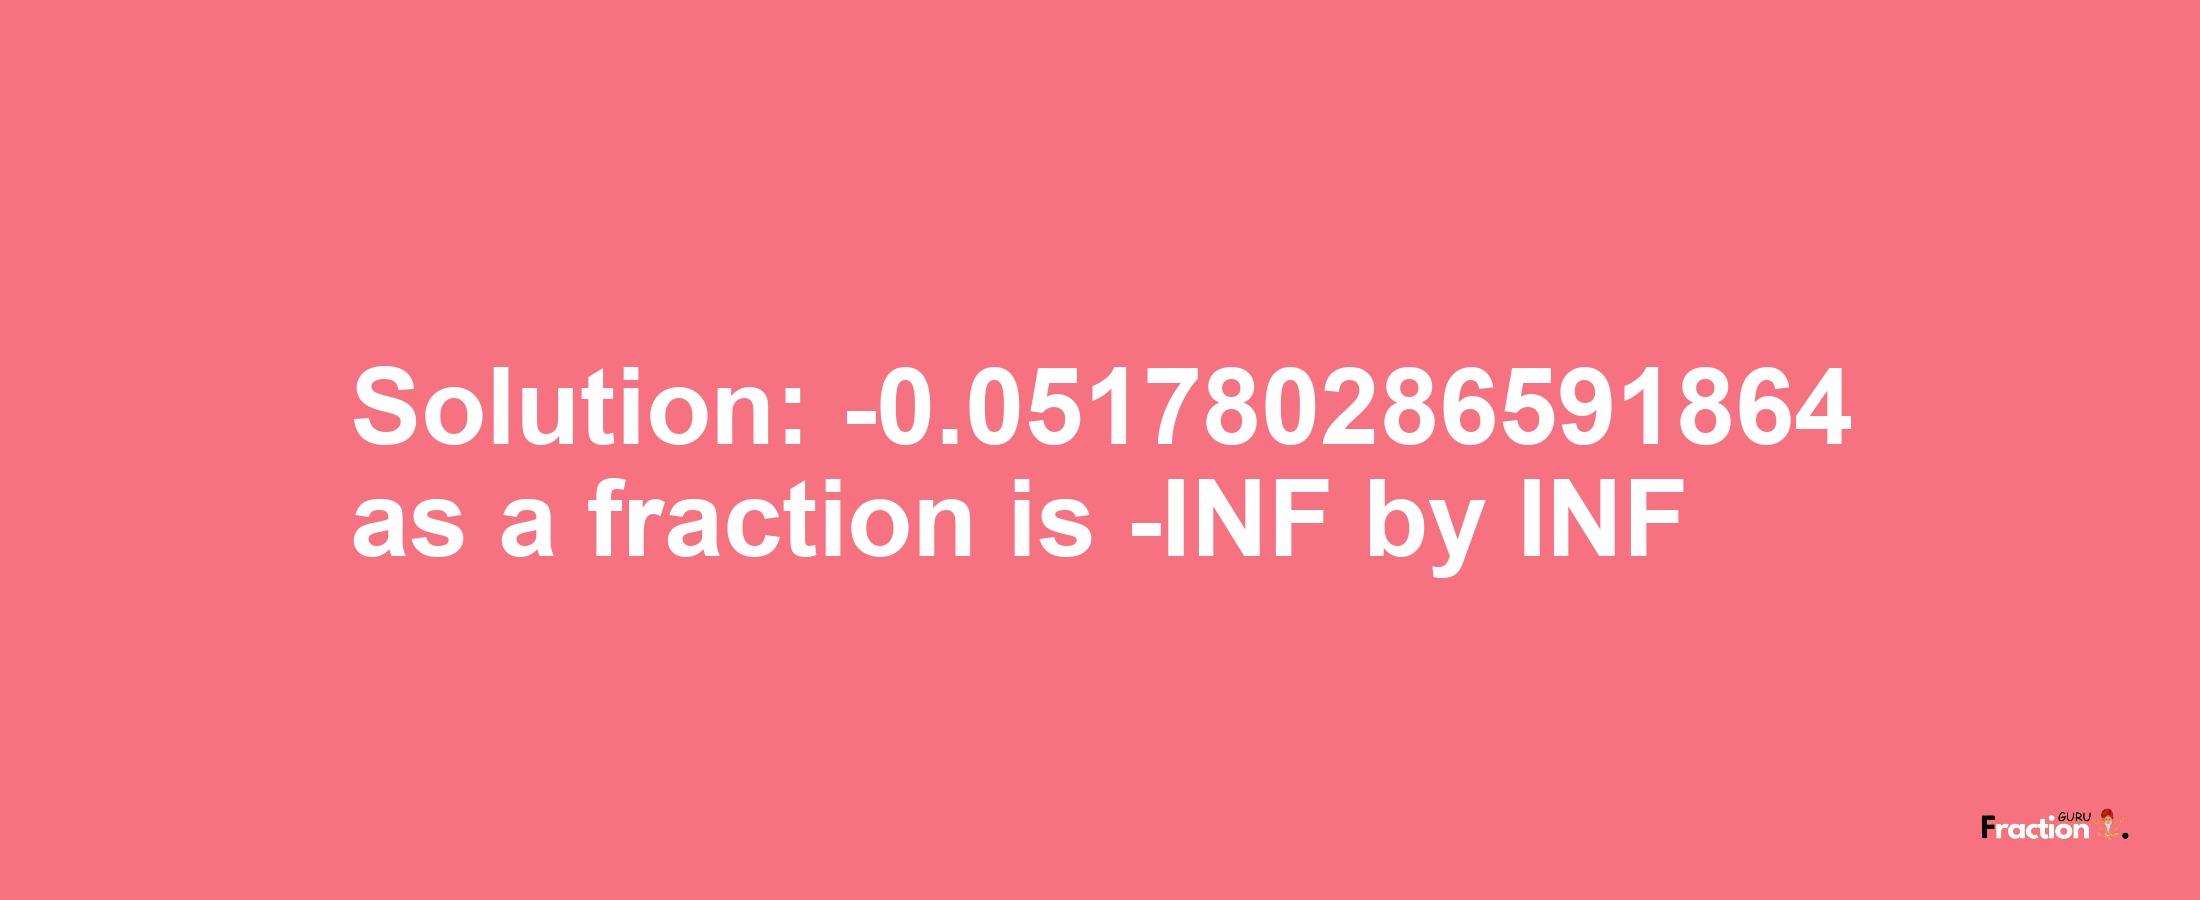 Solution:-0.051780286591864 as a fraction is -INF/INF